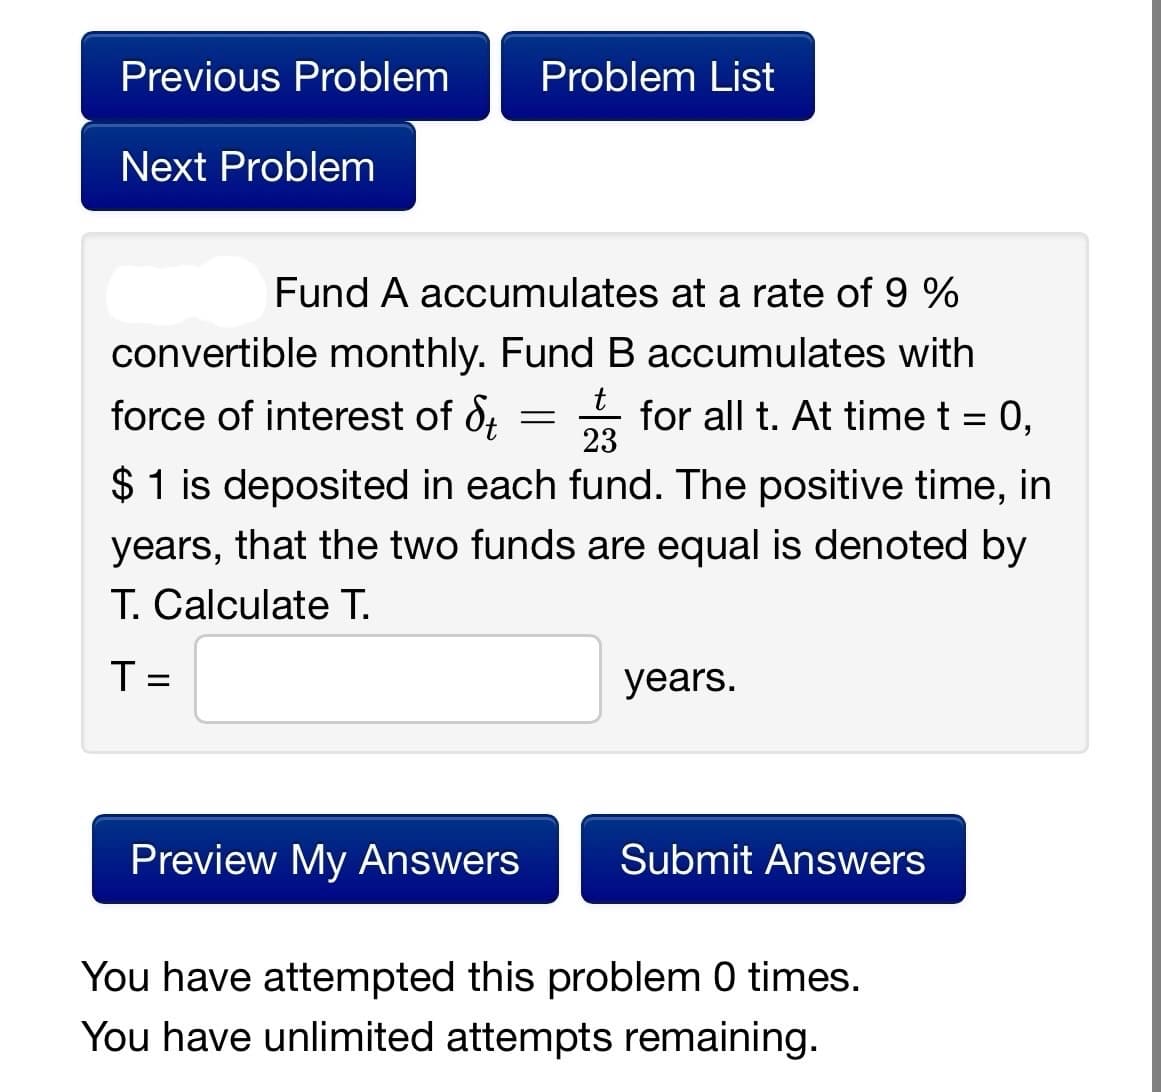 Previous Problem
Next Problem
Problem List
Fund A accumulates at a rate of 9 %
convertible monthly. Fund B accumulates with
t
force of interest of d = 3 for all t. At time t = 0,
St 23
$1 is deposited in each fund. The positive time, in
years, that the two funds are equal is denoted by
T. Calculate T.
T =
years.
Preview My Answers Submit Answers
You have attempted this problem 0 times.
You have unlimited attempts remaining.